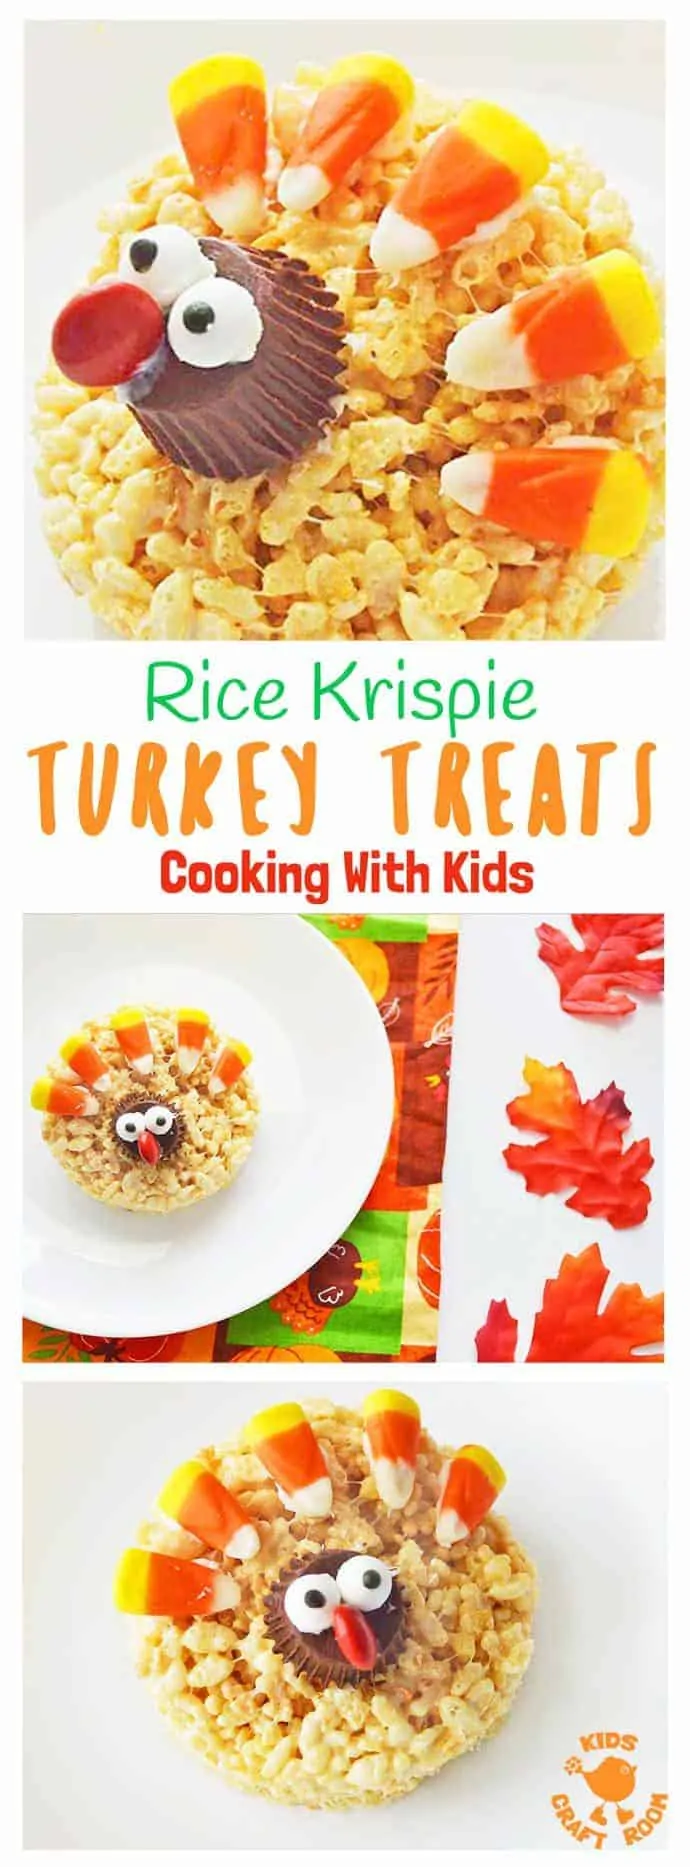 RICE KRISPIE TURKEY TREATS - a simple and fun Thanksgiving recipe that's great for cooking with kids. Easy and delicious this is a Thanksgiving treat the whole family will enjoy.